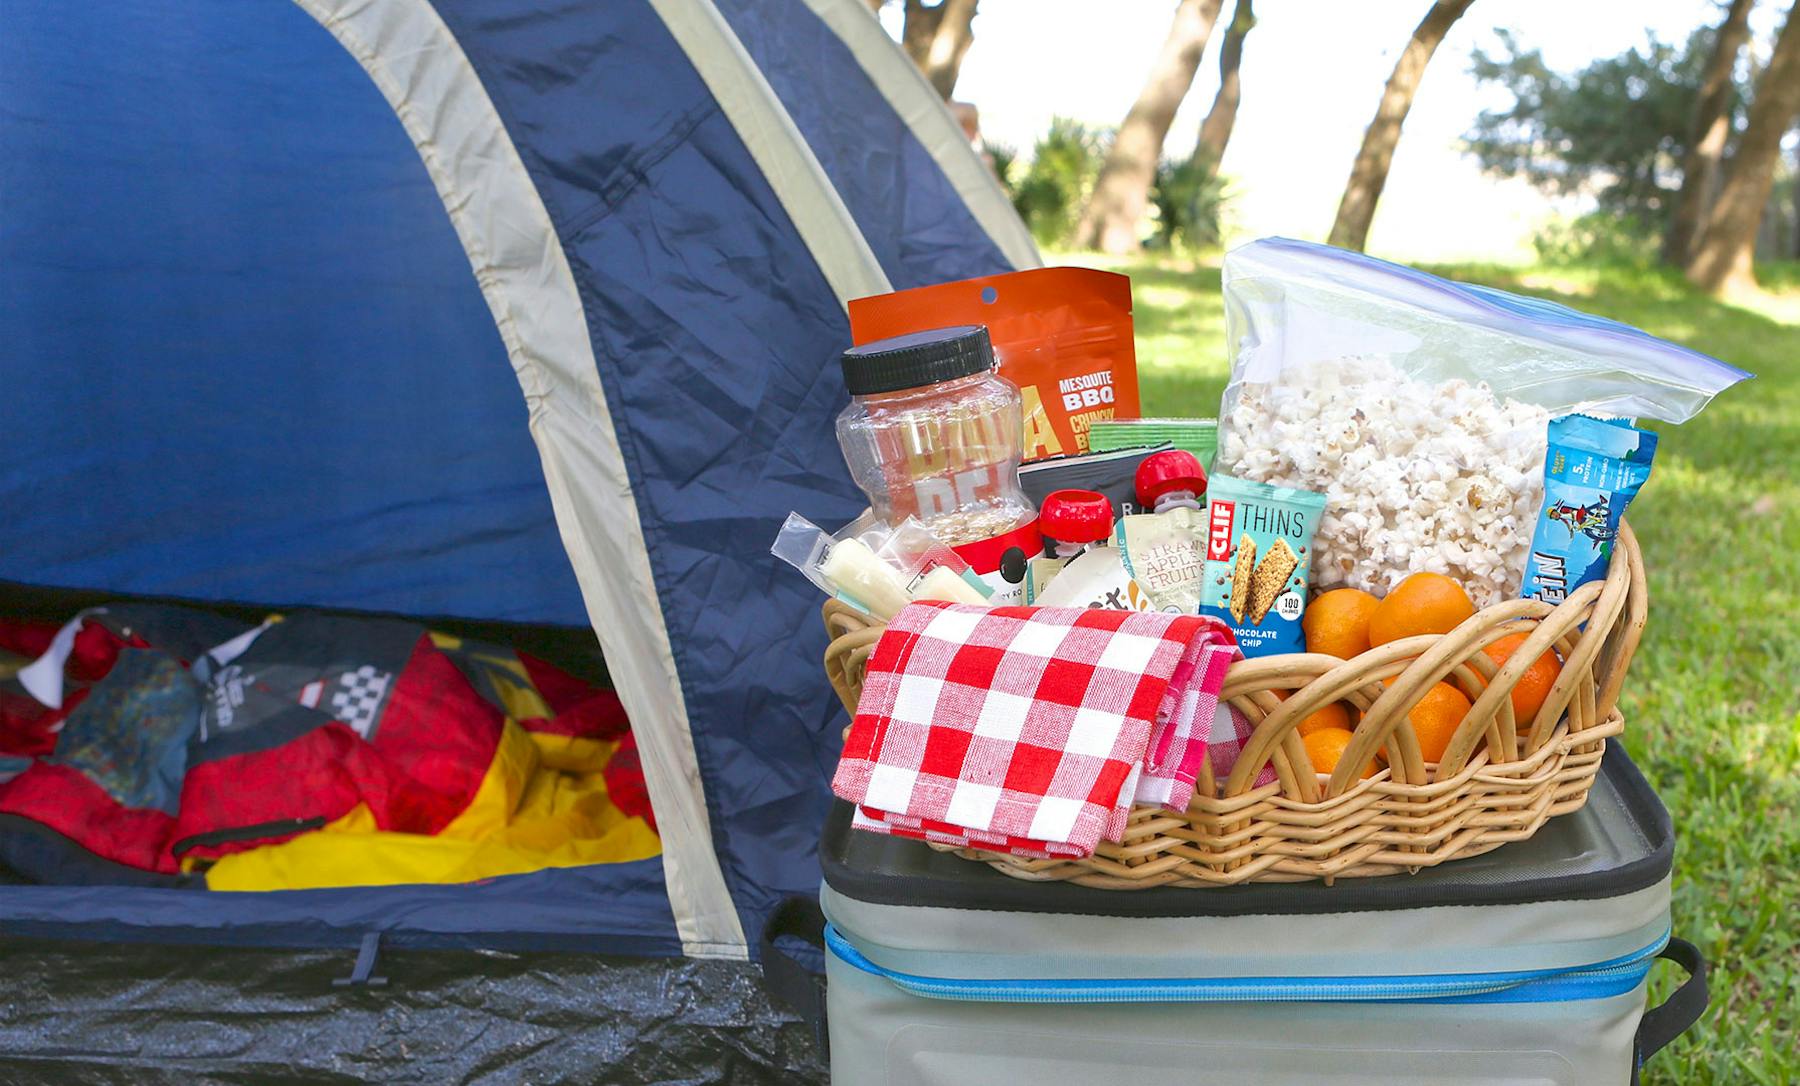 https://clifbar-world.imgix.net/cms/CLIF-Thins-and-Zbar-with-camping-snacks-basket.jpg?w=1800&fit=max&auto=format&auto=compress